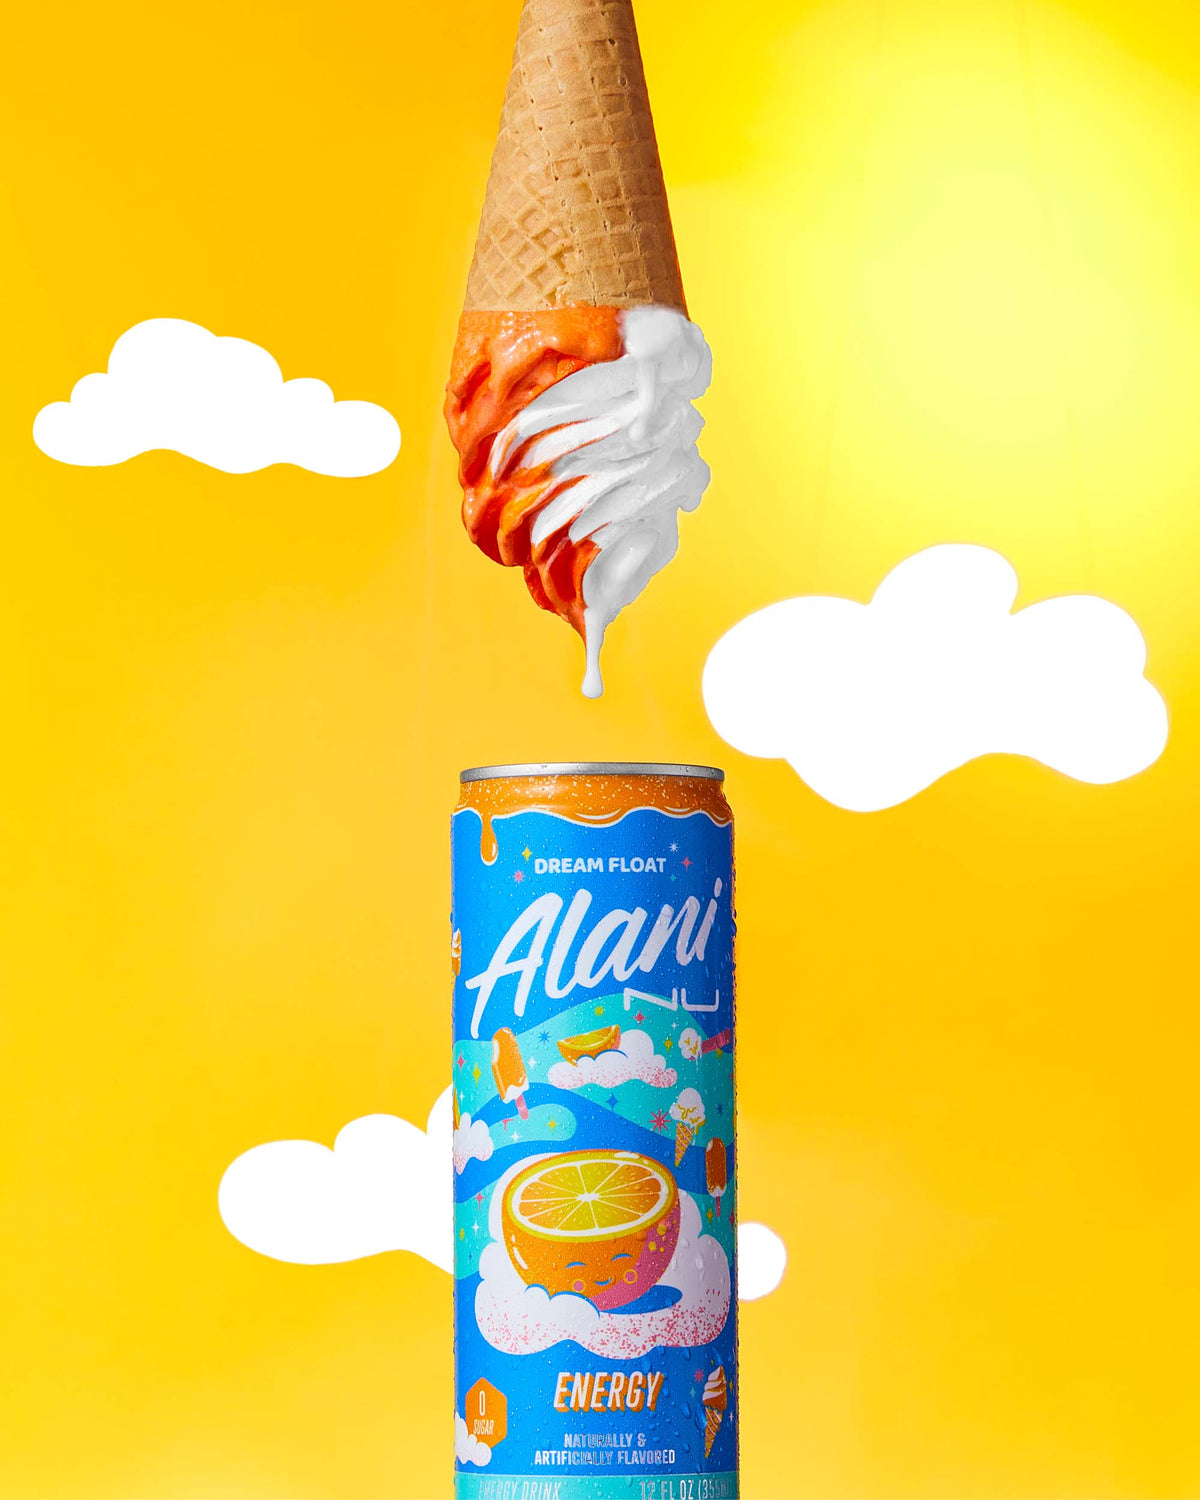 A energy drink in Dream Float flavor displayed next to a cone in upside down from the energy drink.